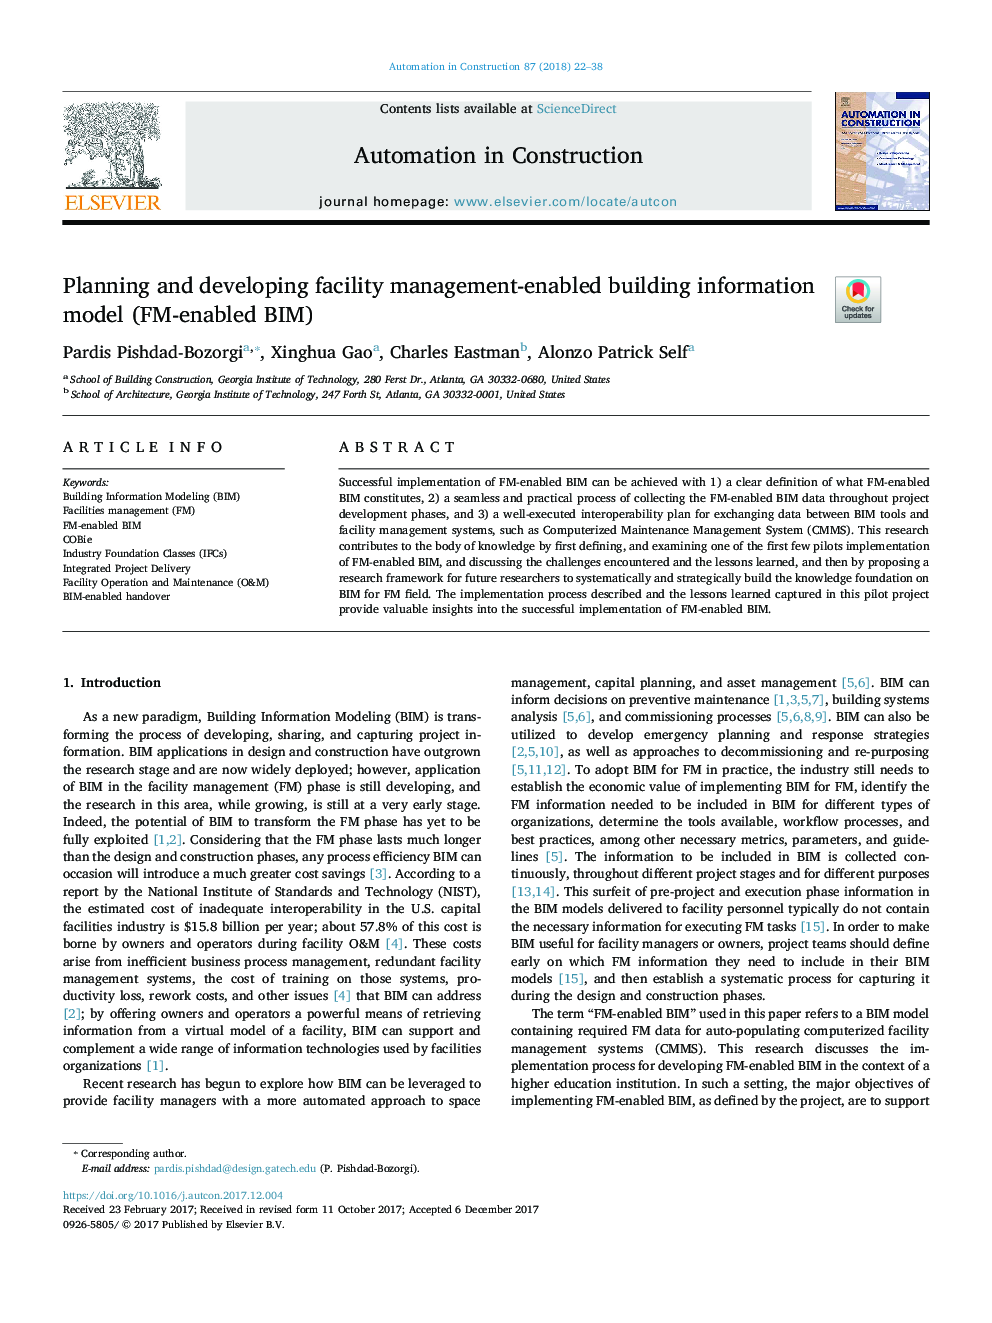 Planning and developing facility management-enabled building information model (FM-enabled BIM)